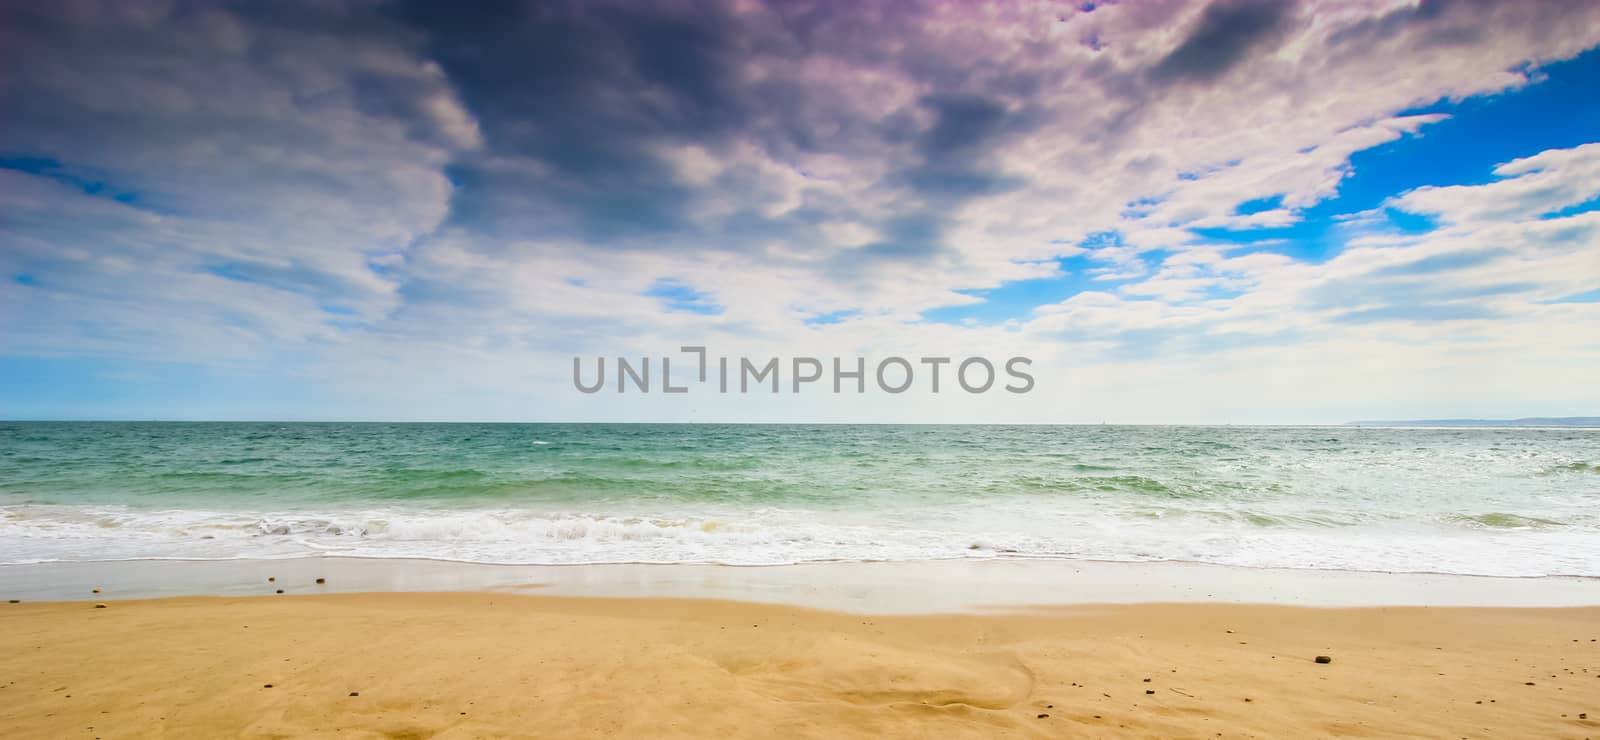 A wide angle landscape shot of beach in the sun